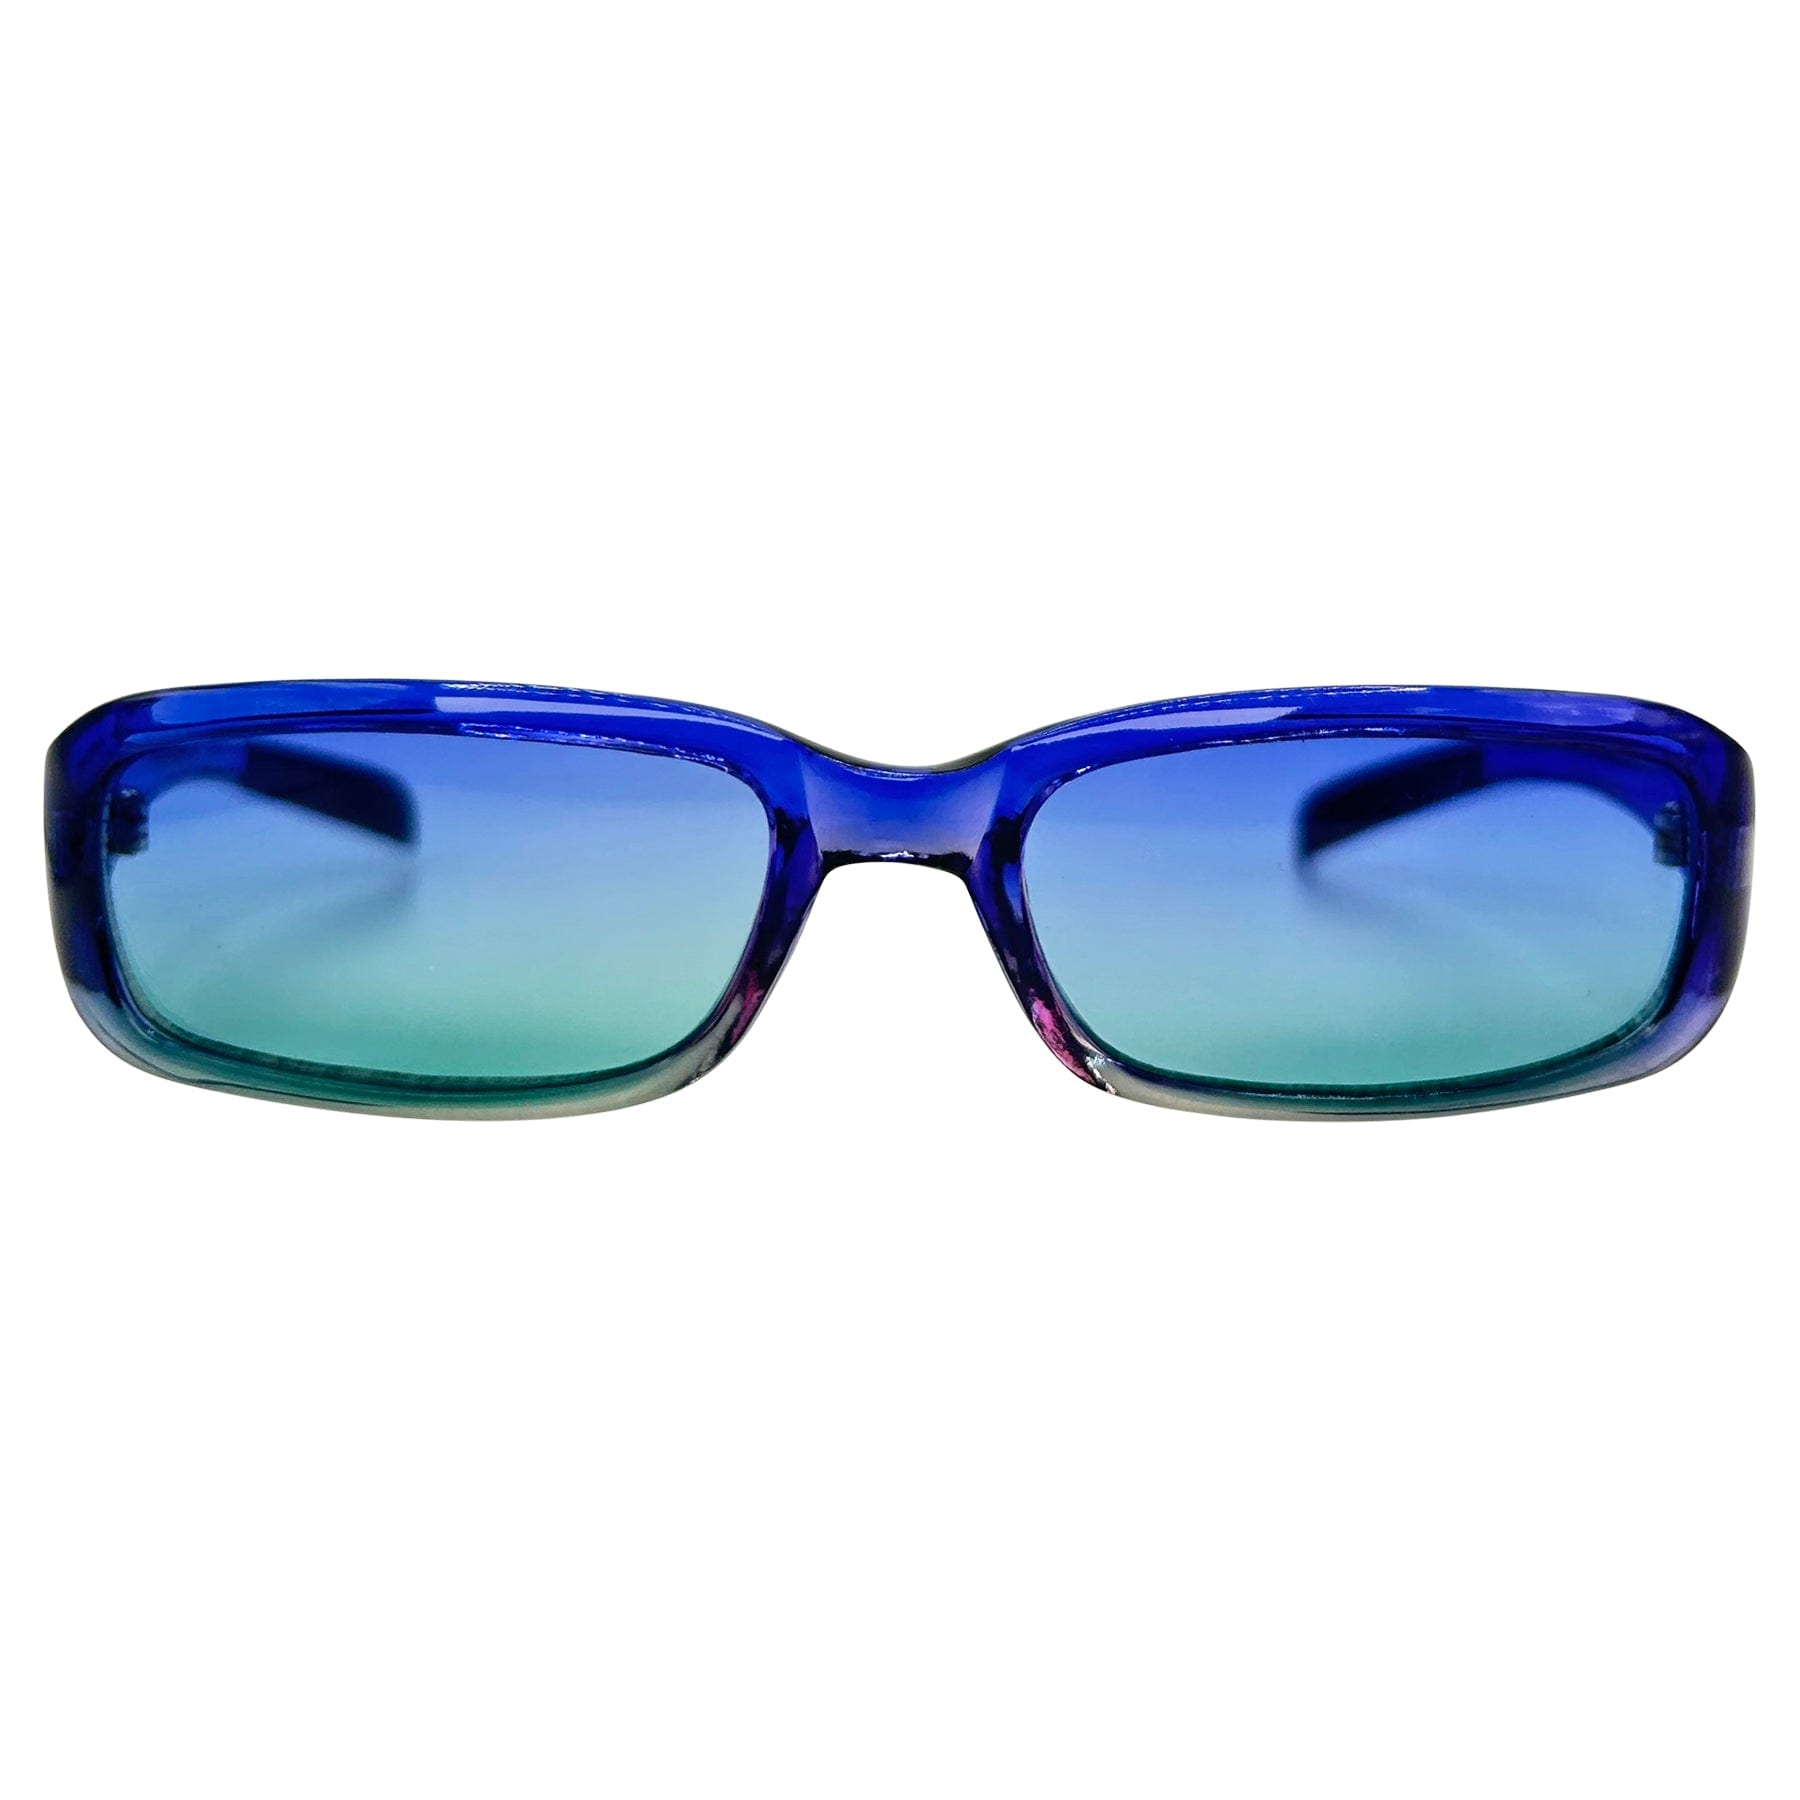 unique colorful 90s sunglasses with a faded tinted lens and frame